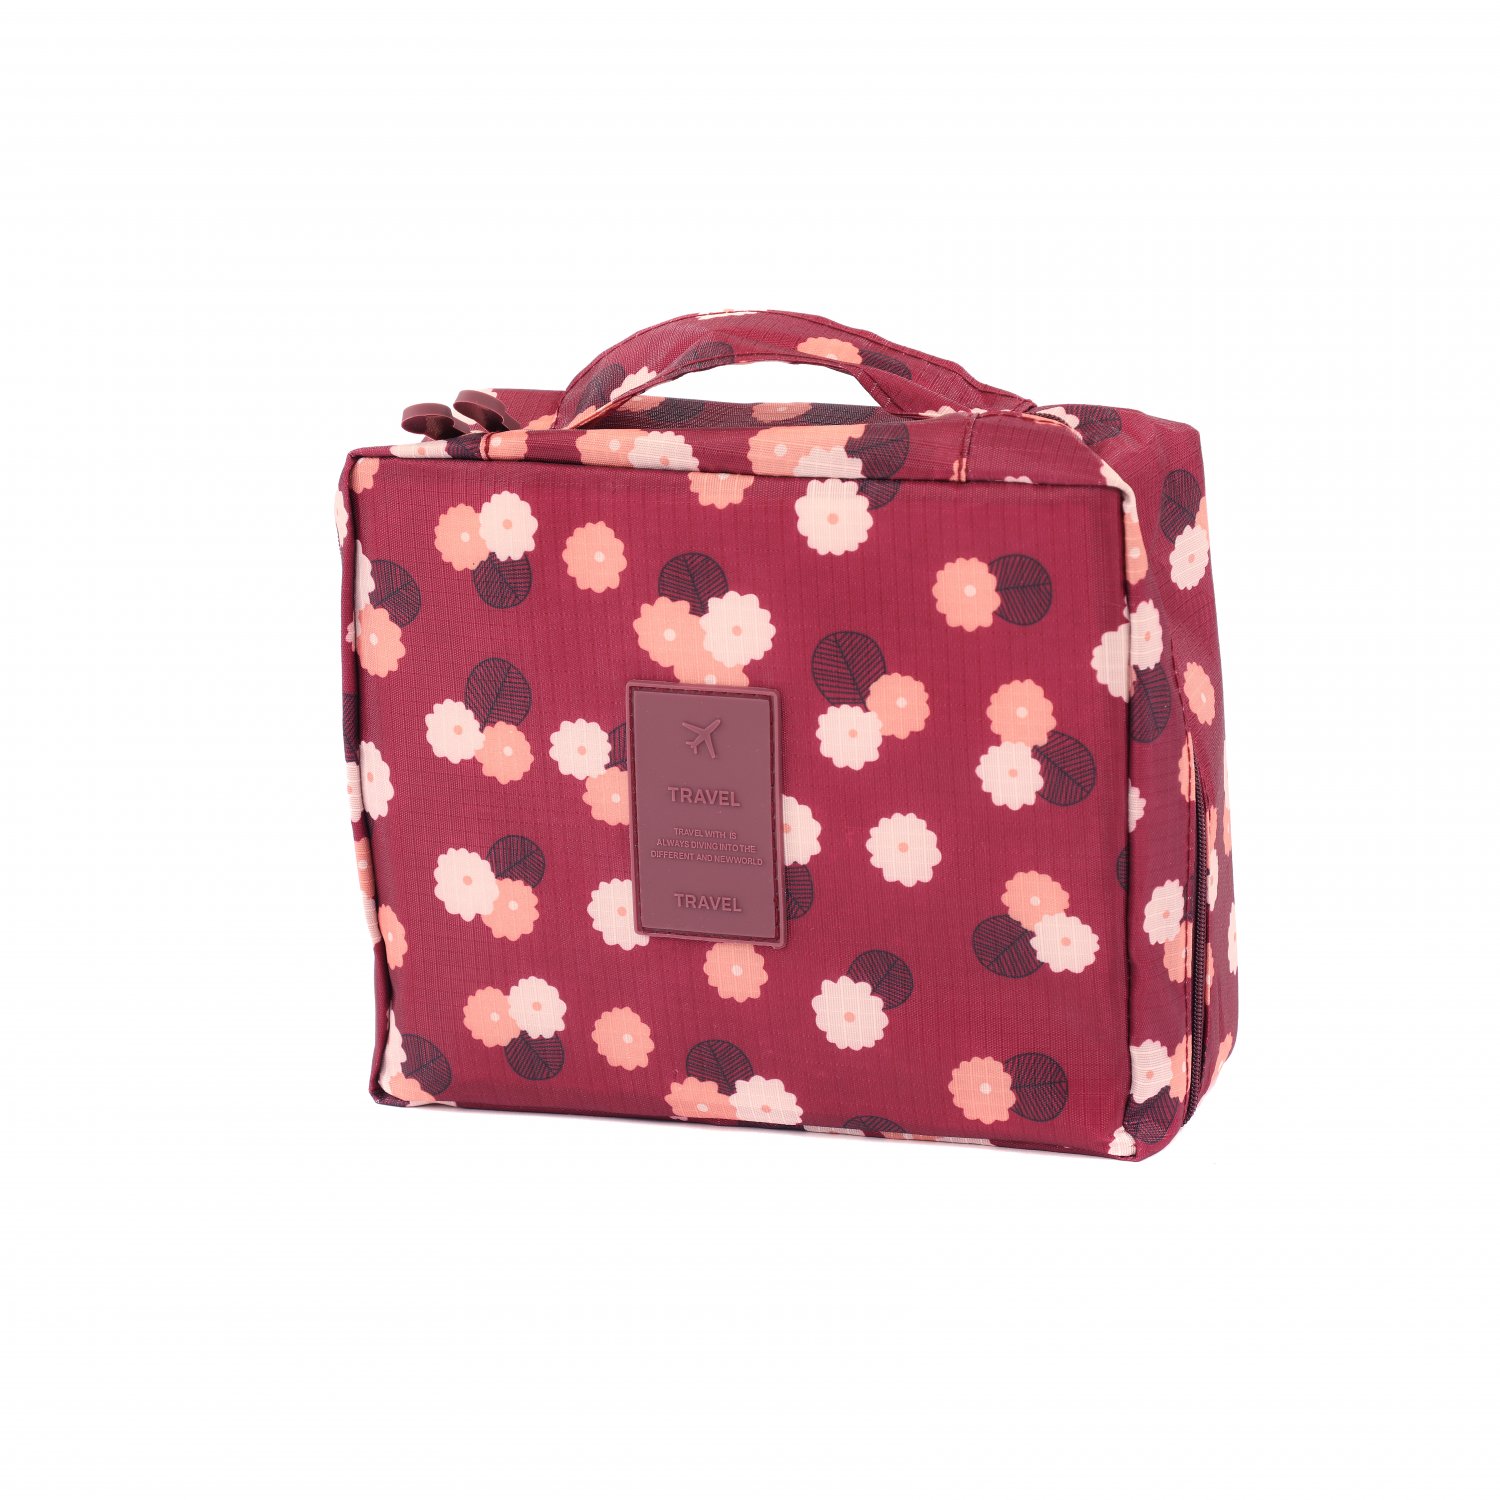 Red Flower Patterned Cosmetic Make-Up Travel Bag Pouch Luggage O